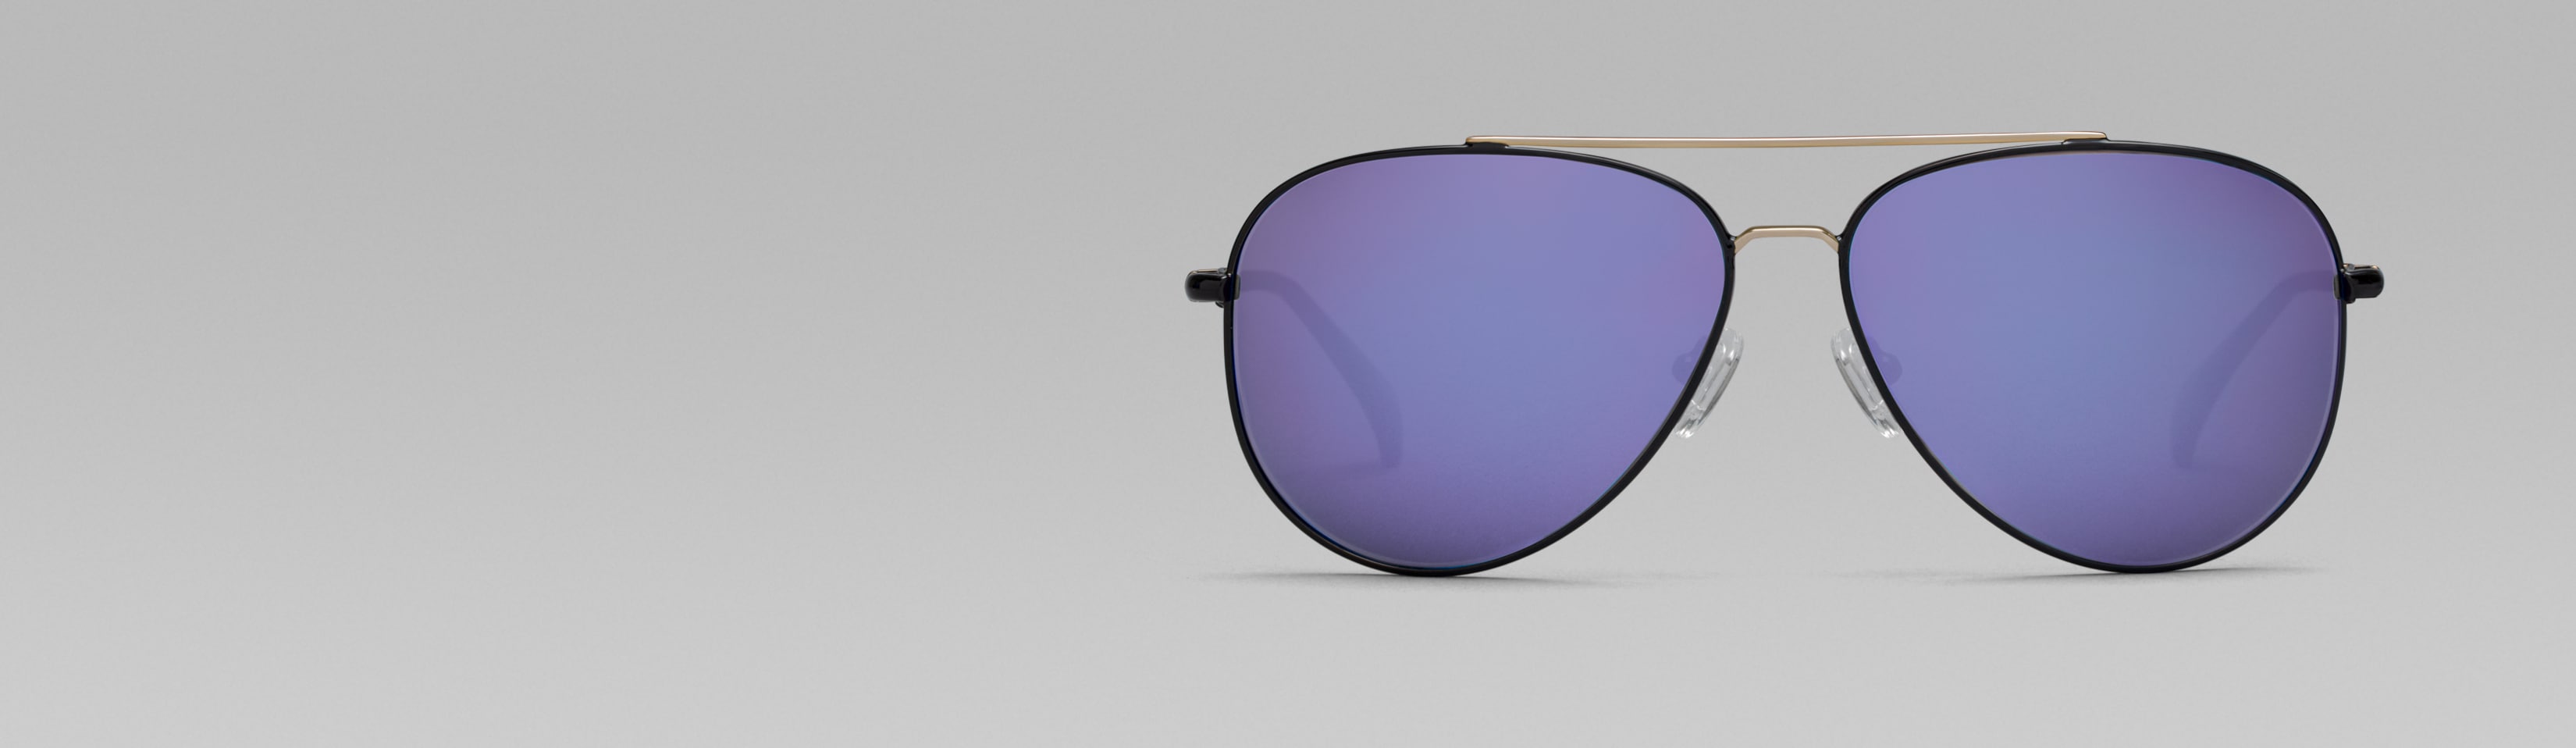 Rotating image of Zenni Premium Aviator Sunglasses #1126721 in black with tinted lens (yellow and lavender tint) and mirror coating options (indigo blue, moss green, and lavender mirror).